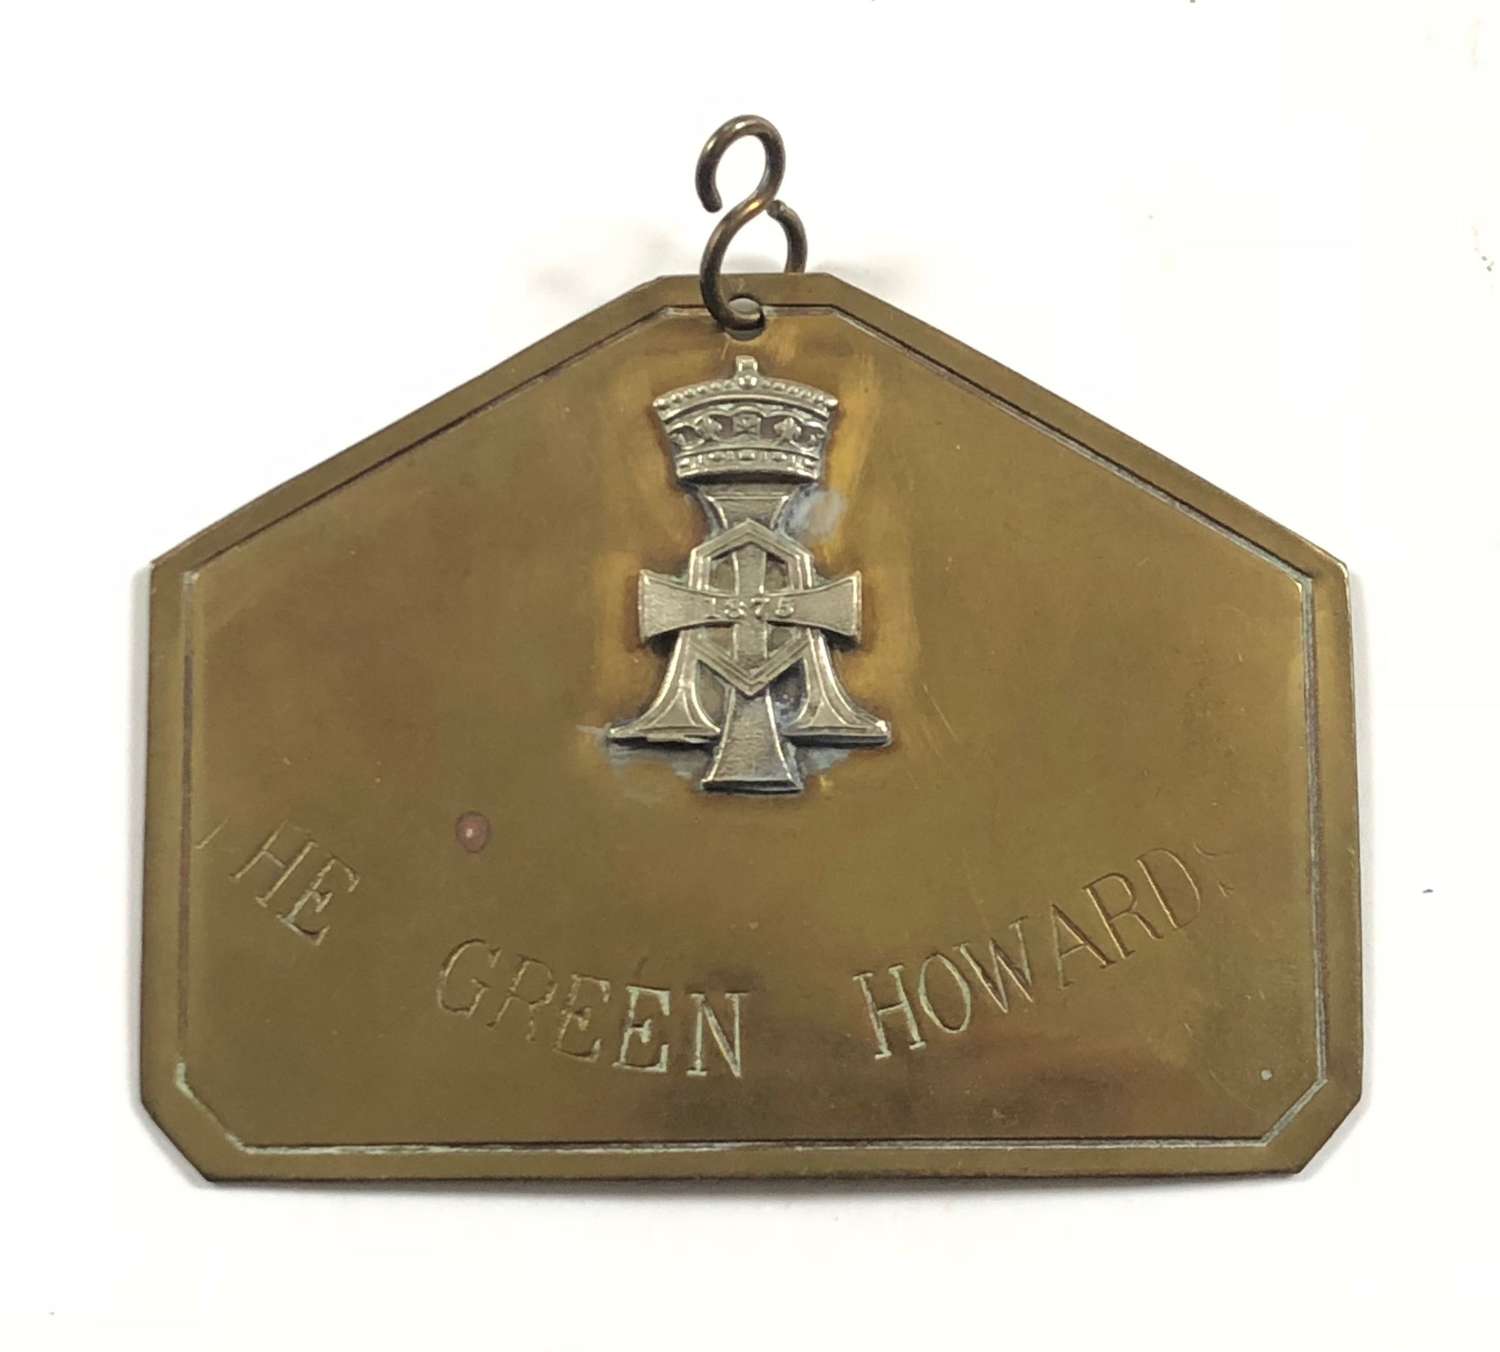 Green Howards The Yorkshire Regiment Other Rank’s Duty Brass Plate.